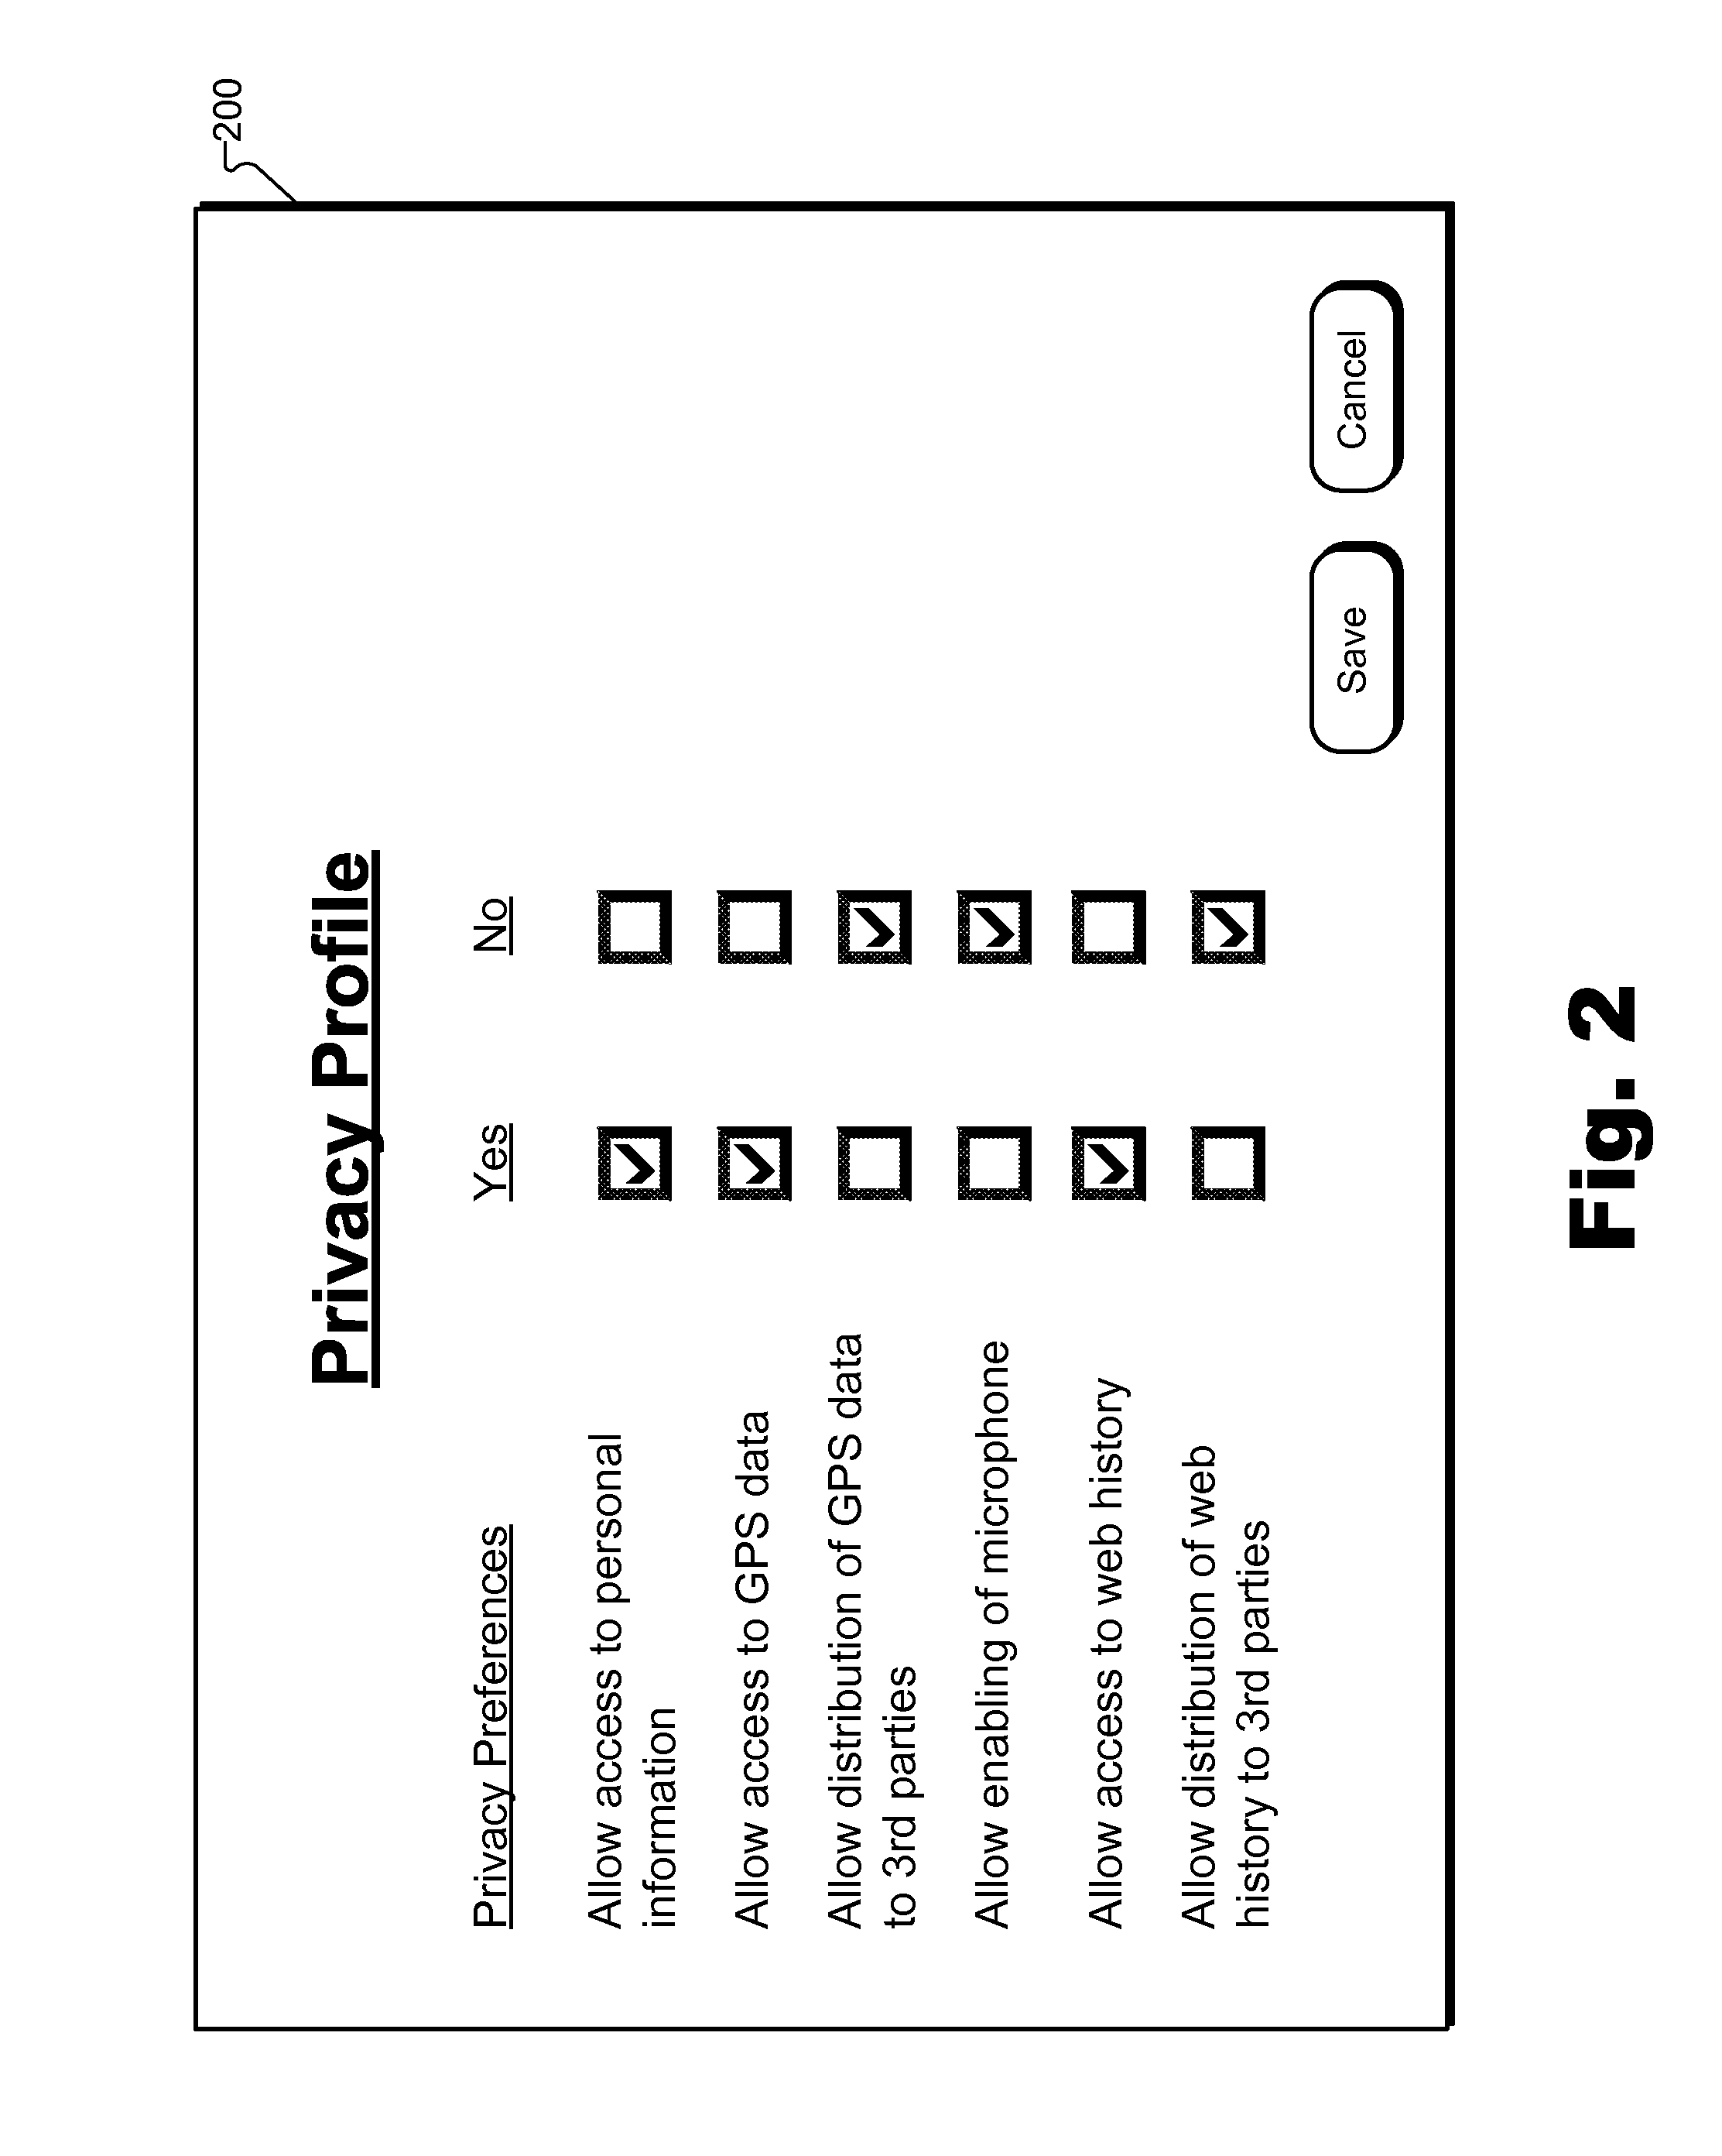 Methods and Systems for Providing a Notification of a Compliance Level of an Application With Respect to a Privacy Profile Associated With a User